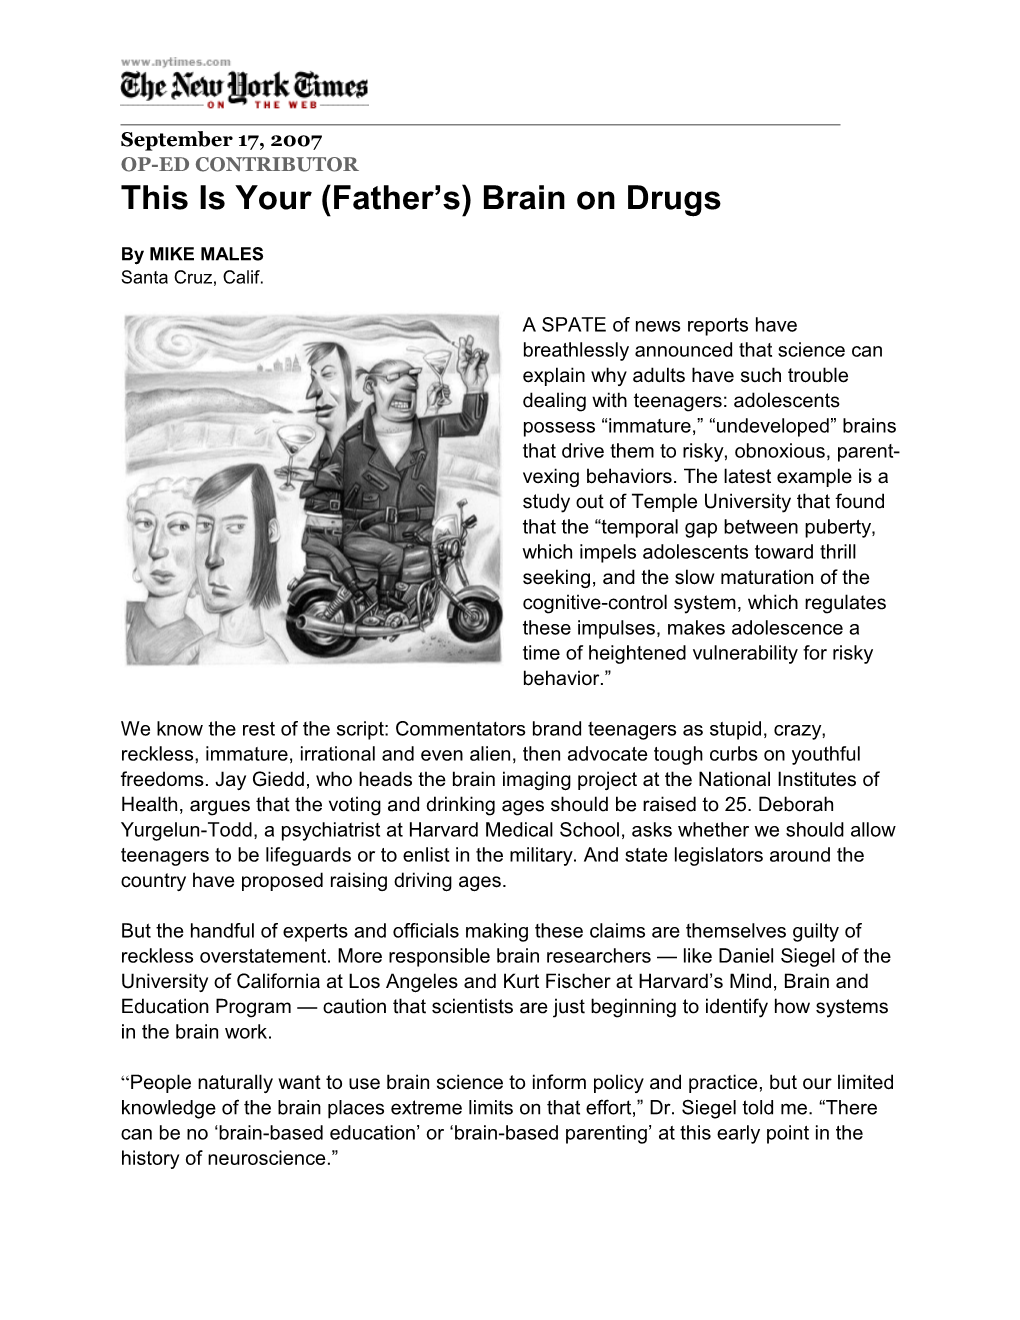 This Is Your (Father S) Brain on Drugs - New York Times